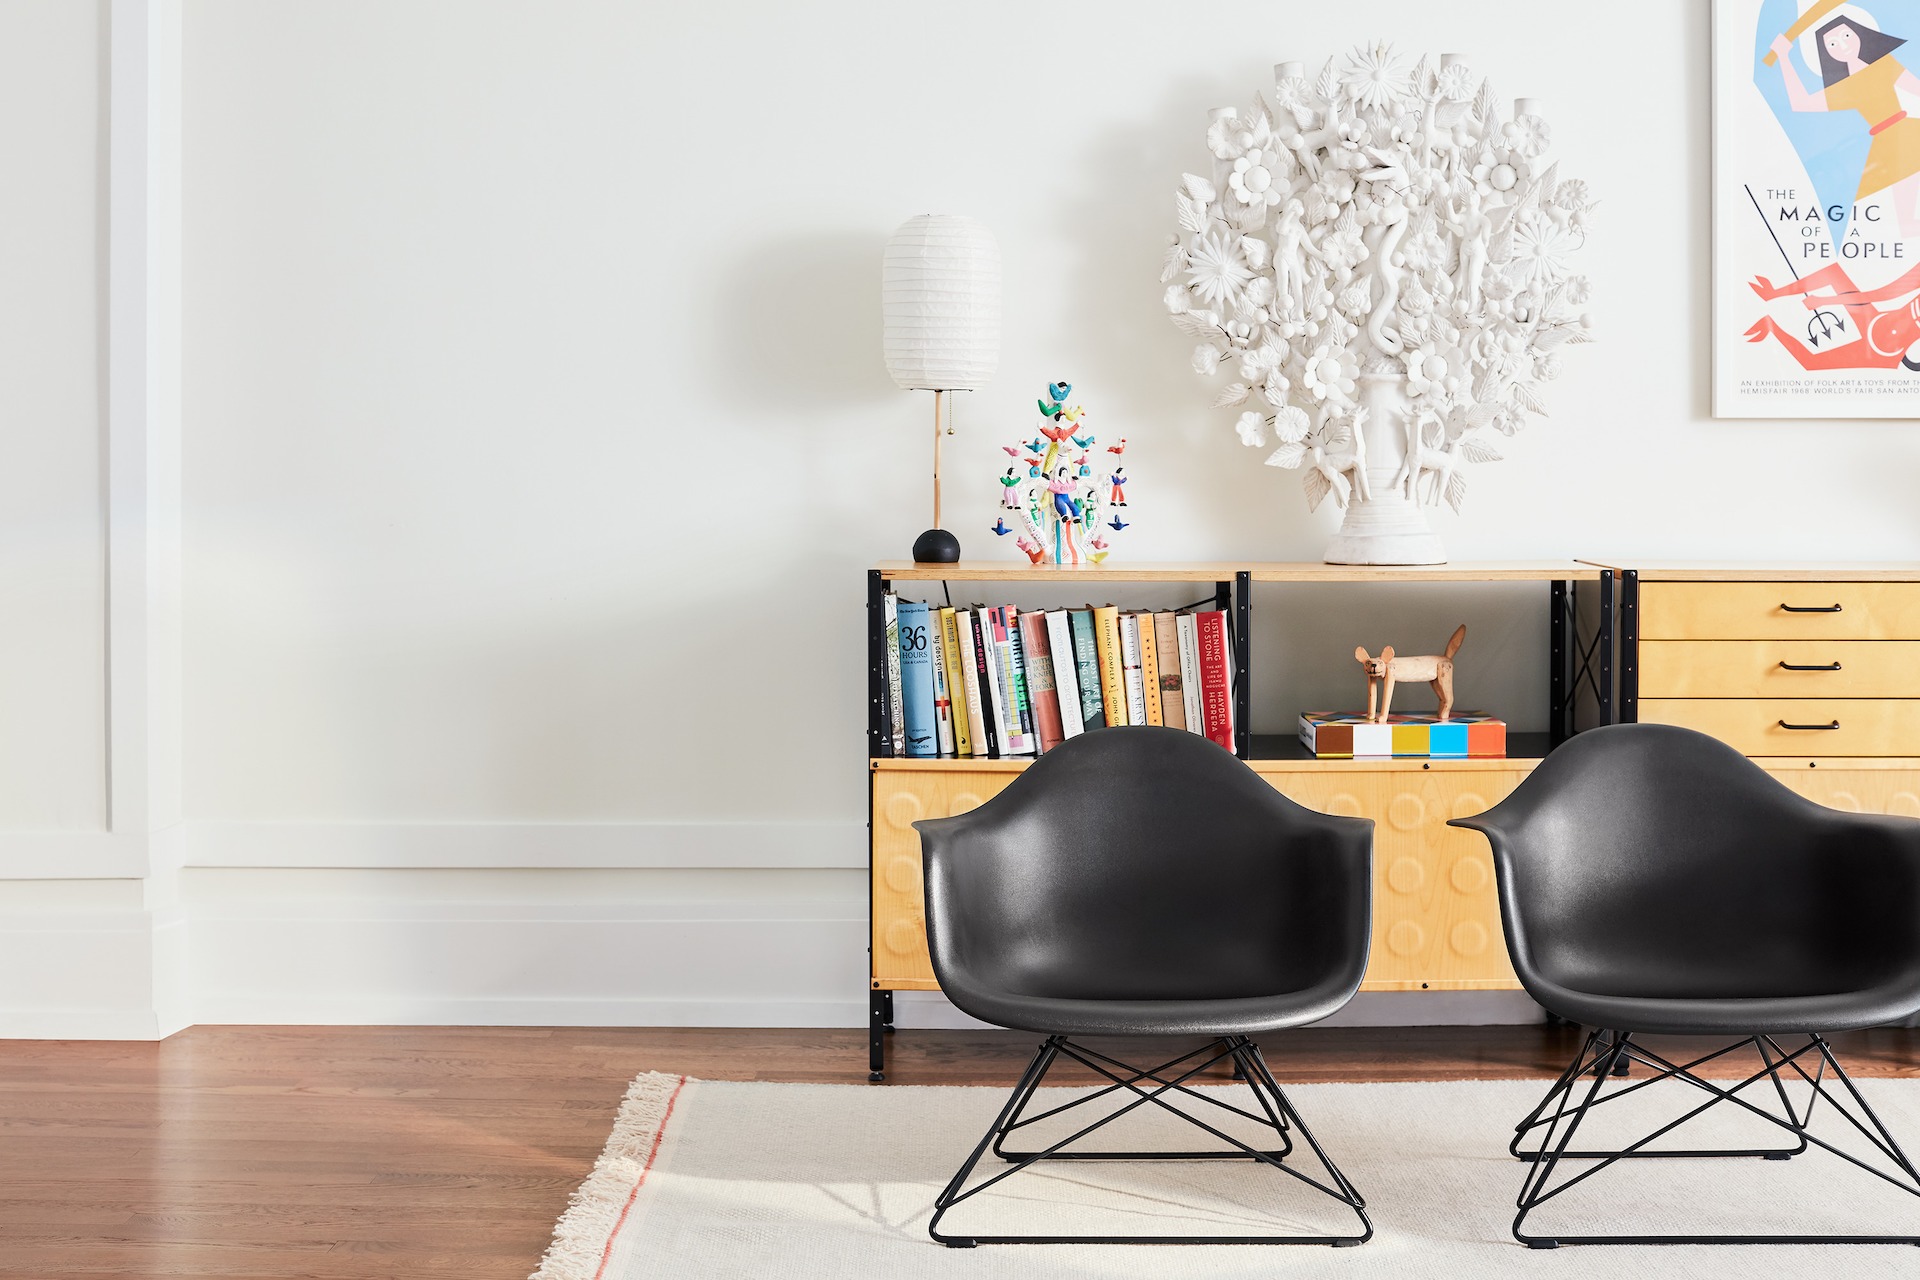 Two Eames Molded Plastic Armchairs with low wire bases in front of an Eames Storage Unit in a casual lounge setting.